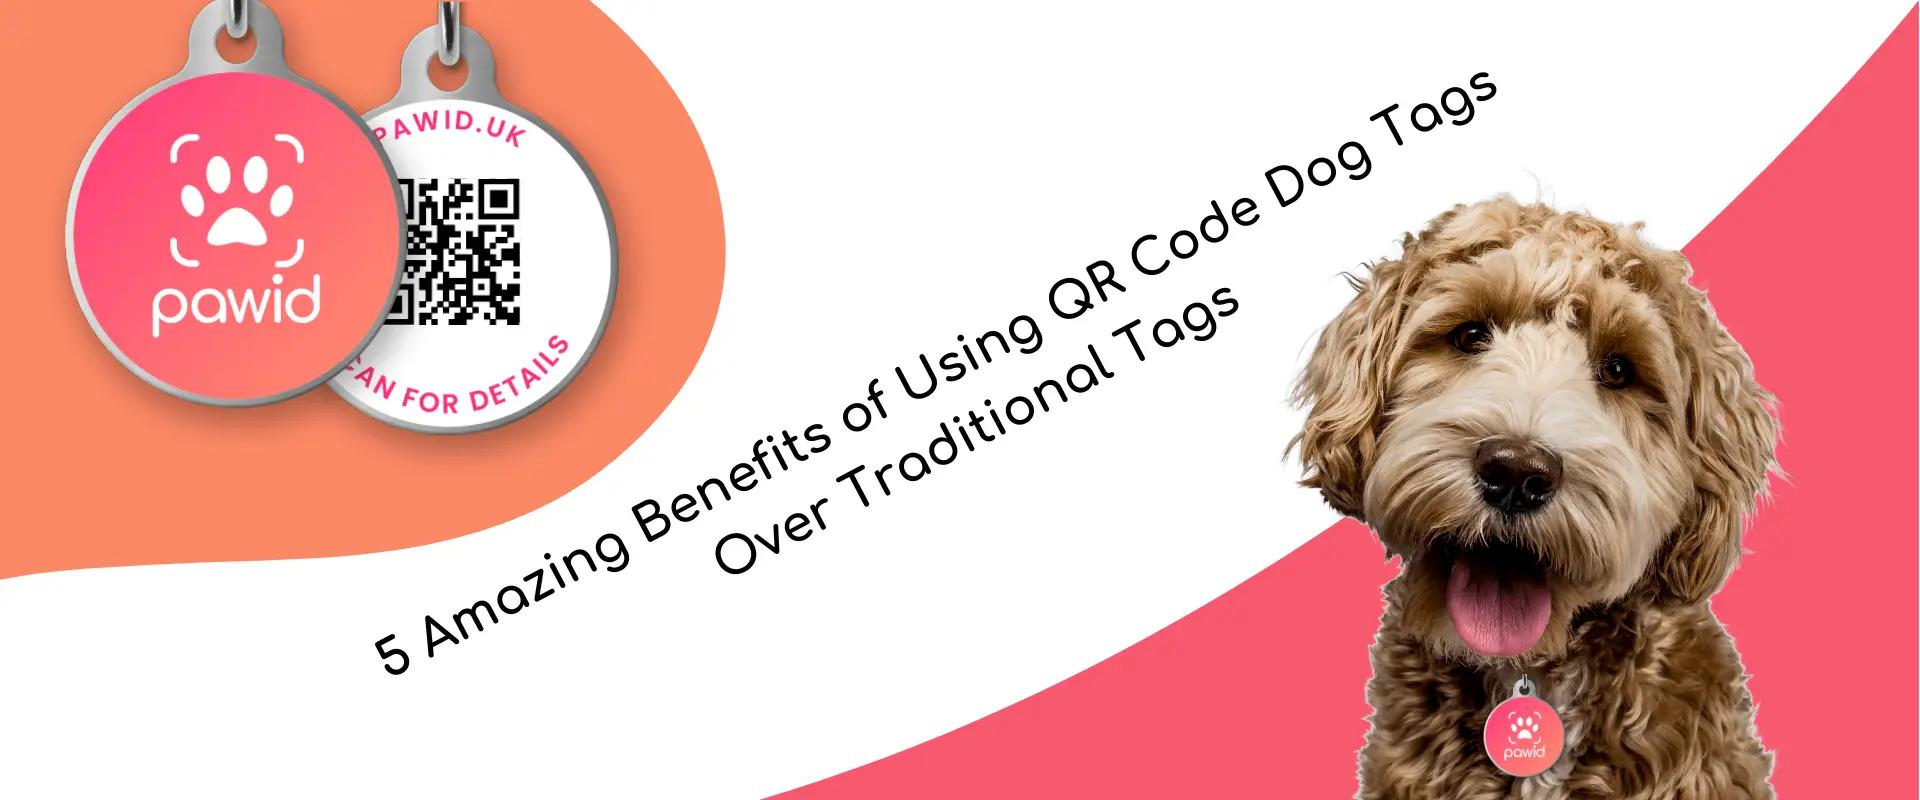 5 Amazing Benefits of Using QR Code Dog Tags over Traditional Tags